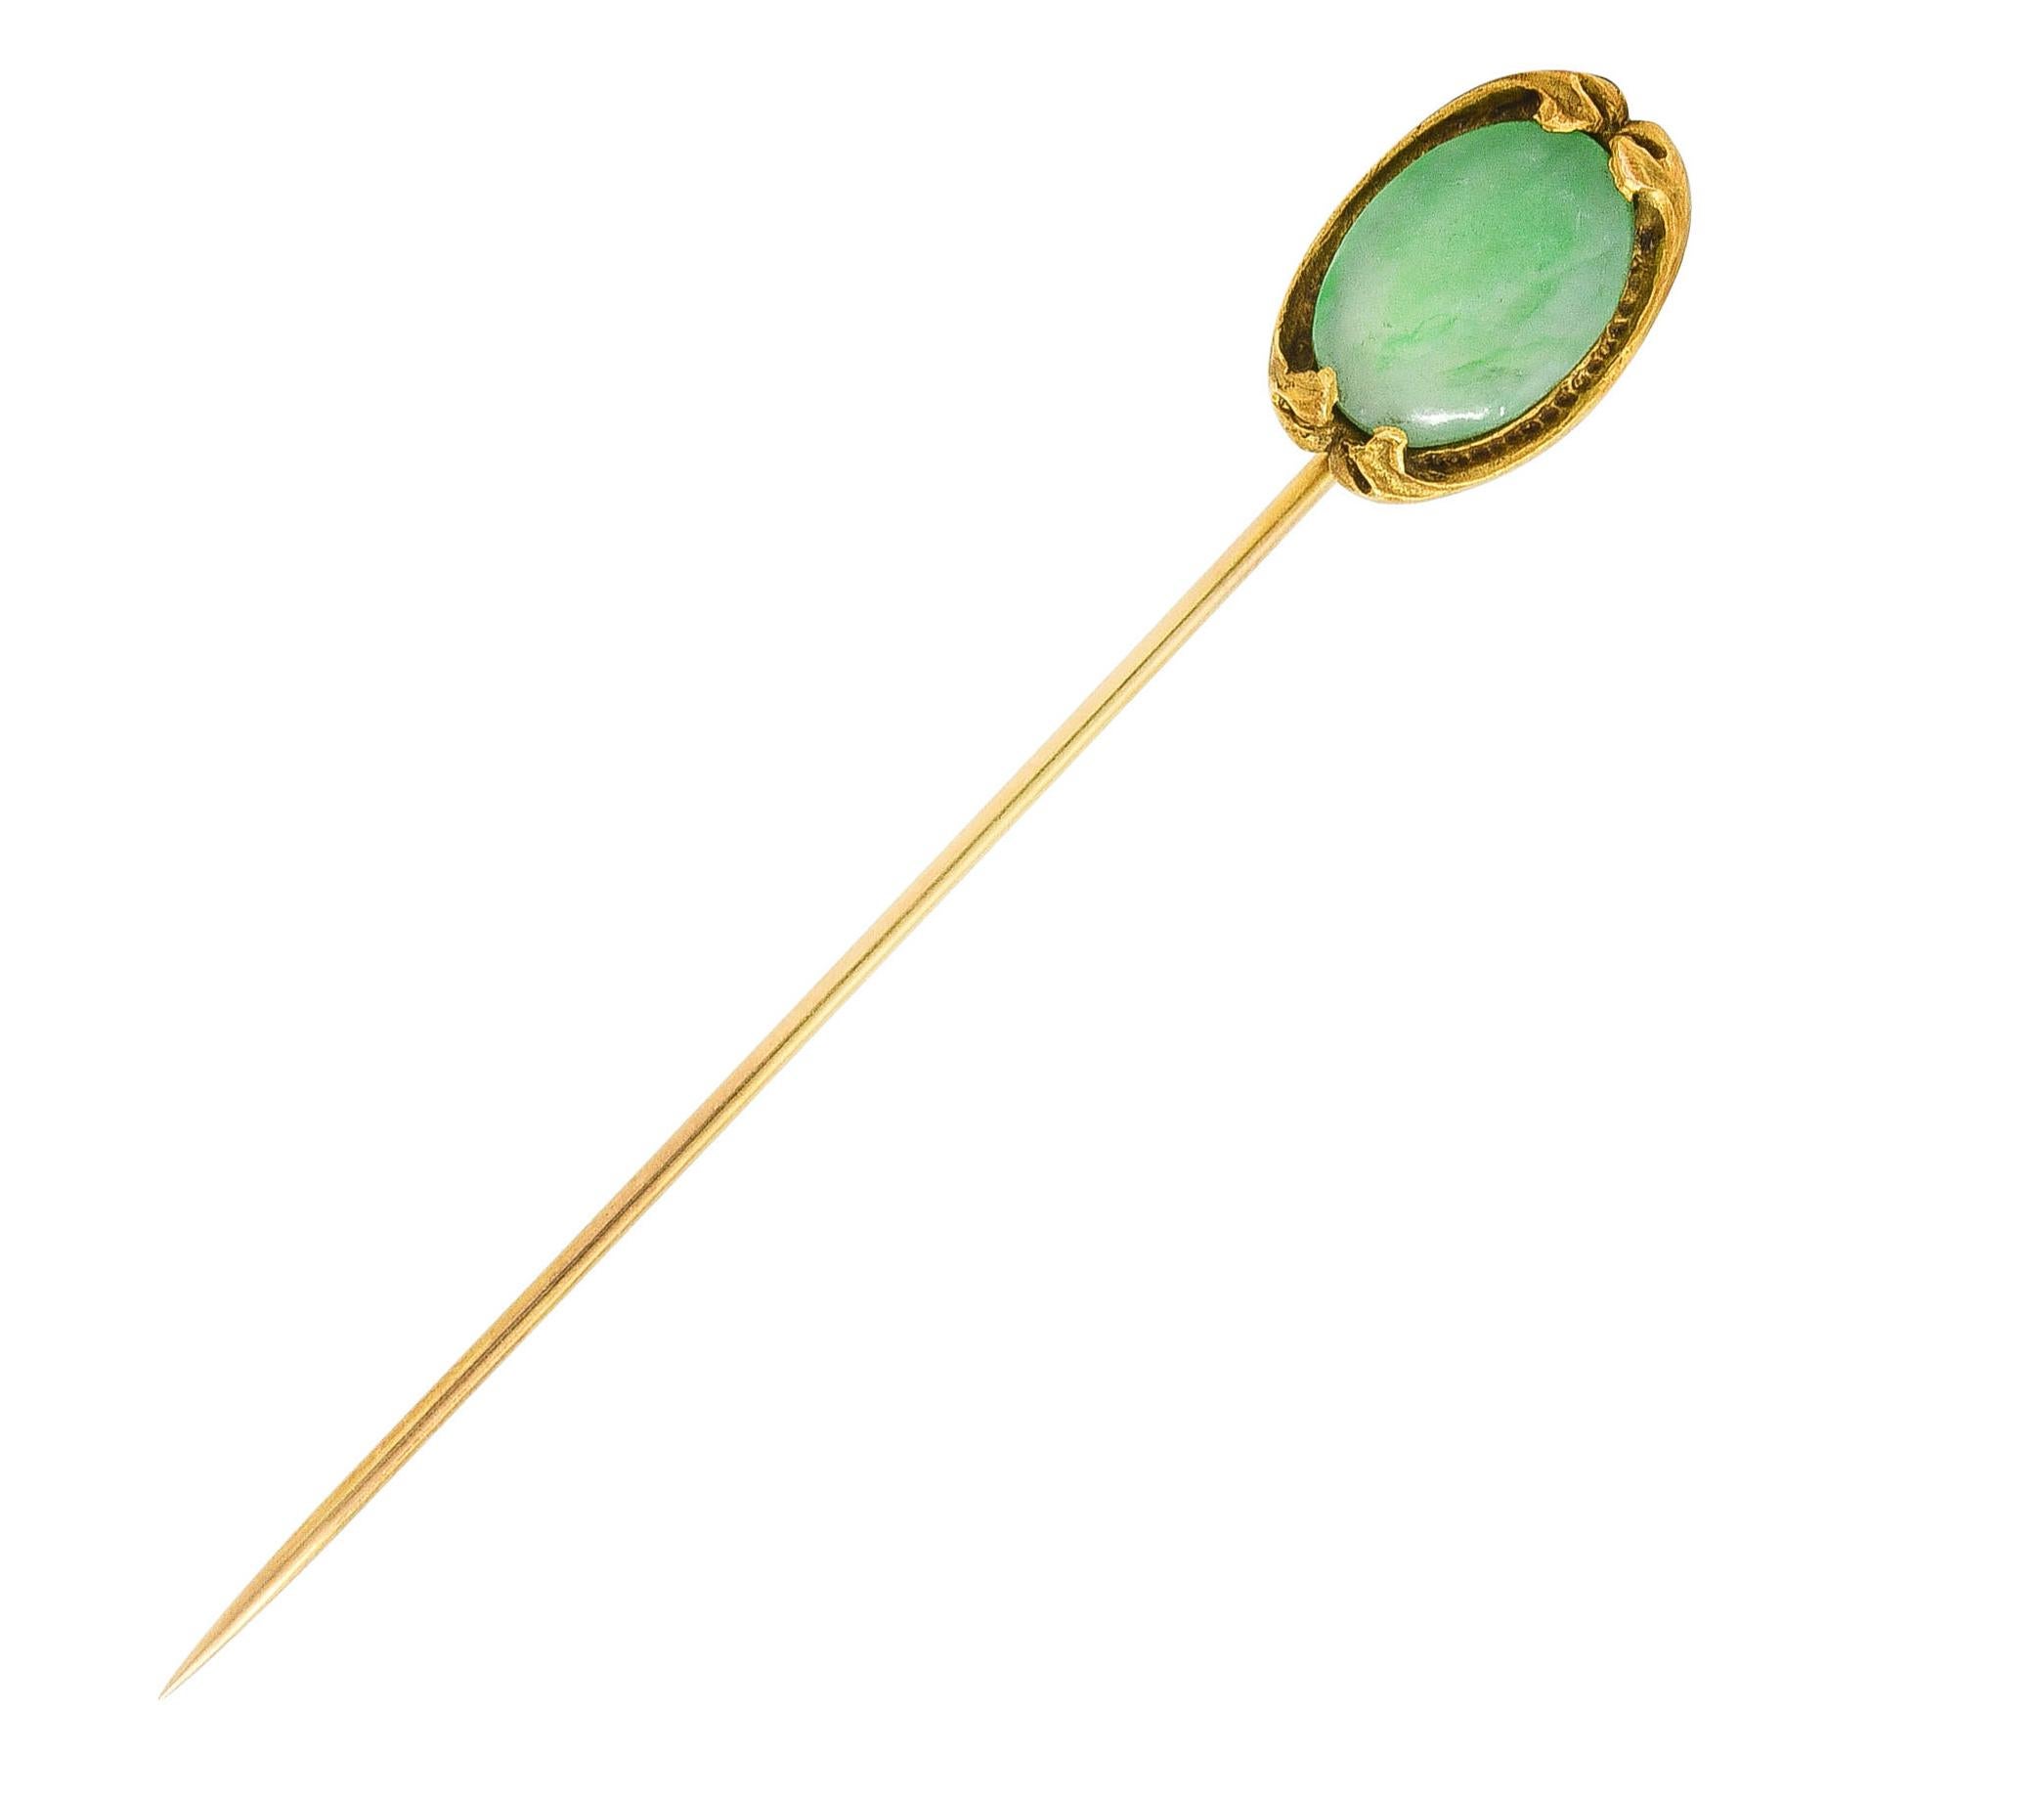 Stickpin designed as stylized ginkgo leaf frame with textured ridges

Centering an oval jade cabochon measuring 12.0 x 9.0 mm

Jade is translucent green with mottling and very good polish

Head tested as 18 karat gold

Fully signed for Walton &